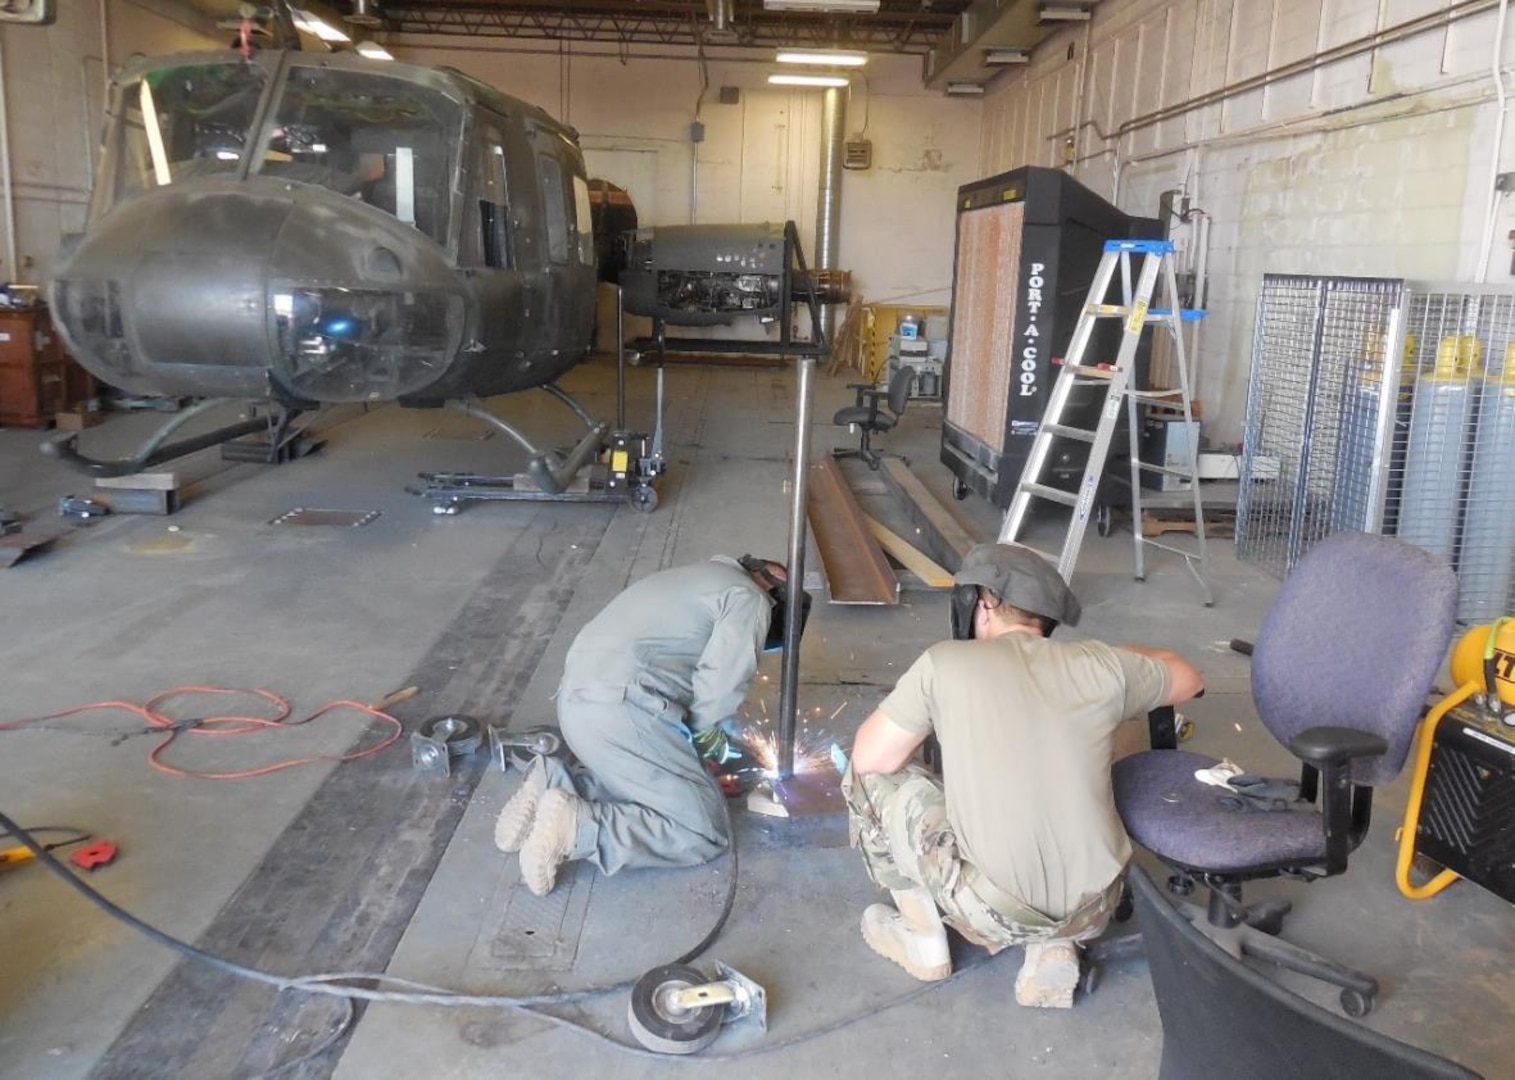 A member of the 210th RED HORSE team, left, welds a wheel caster in July 2020 while another member looks on. The wheel caster aided in the transport of the UH-1 helicopter airframe in the background. The airframe was relocated to the Defense Nuclear Weapon School training site on base to be used as a training aid.